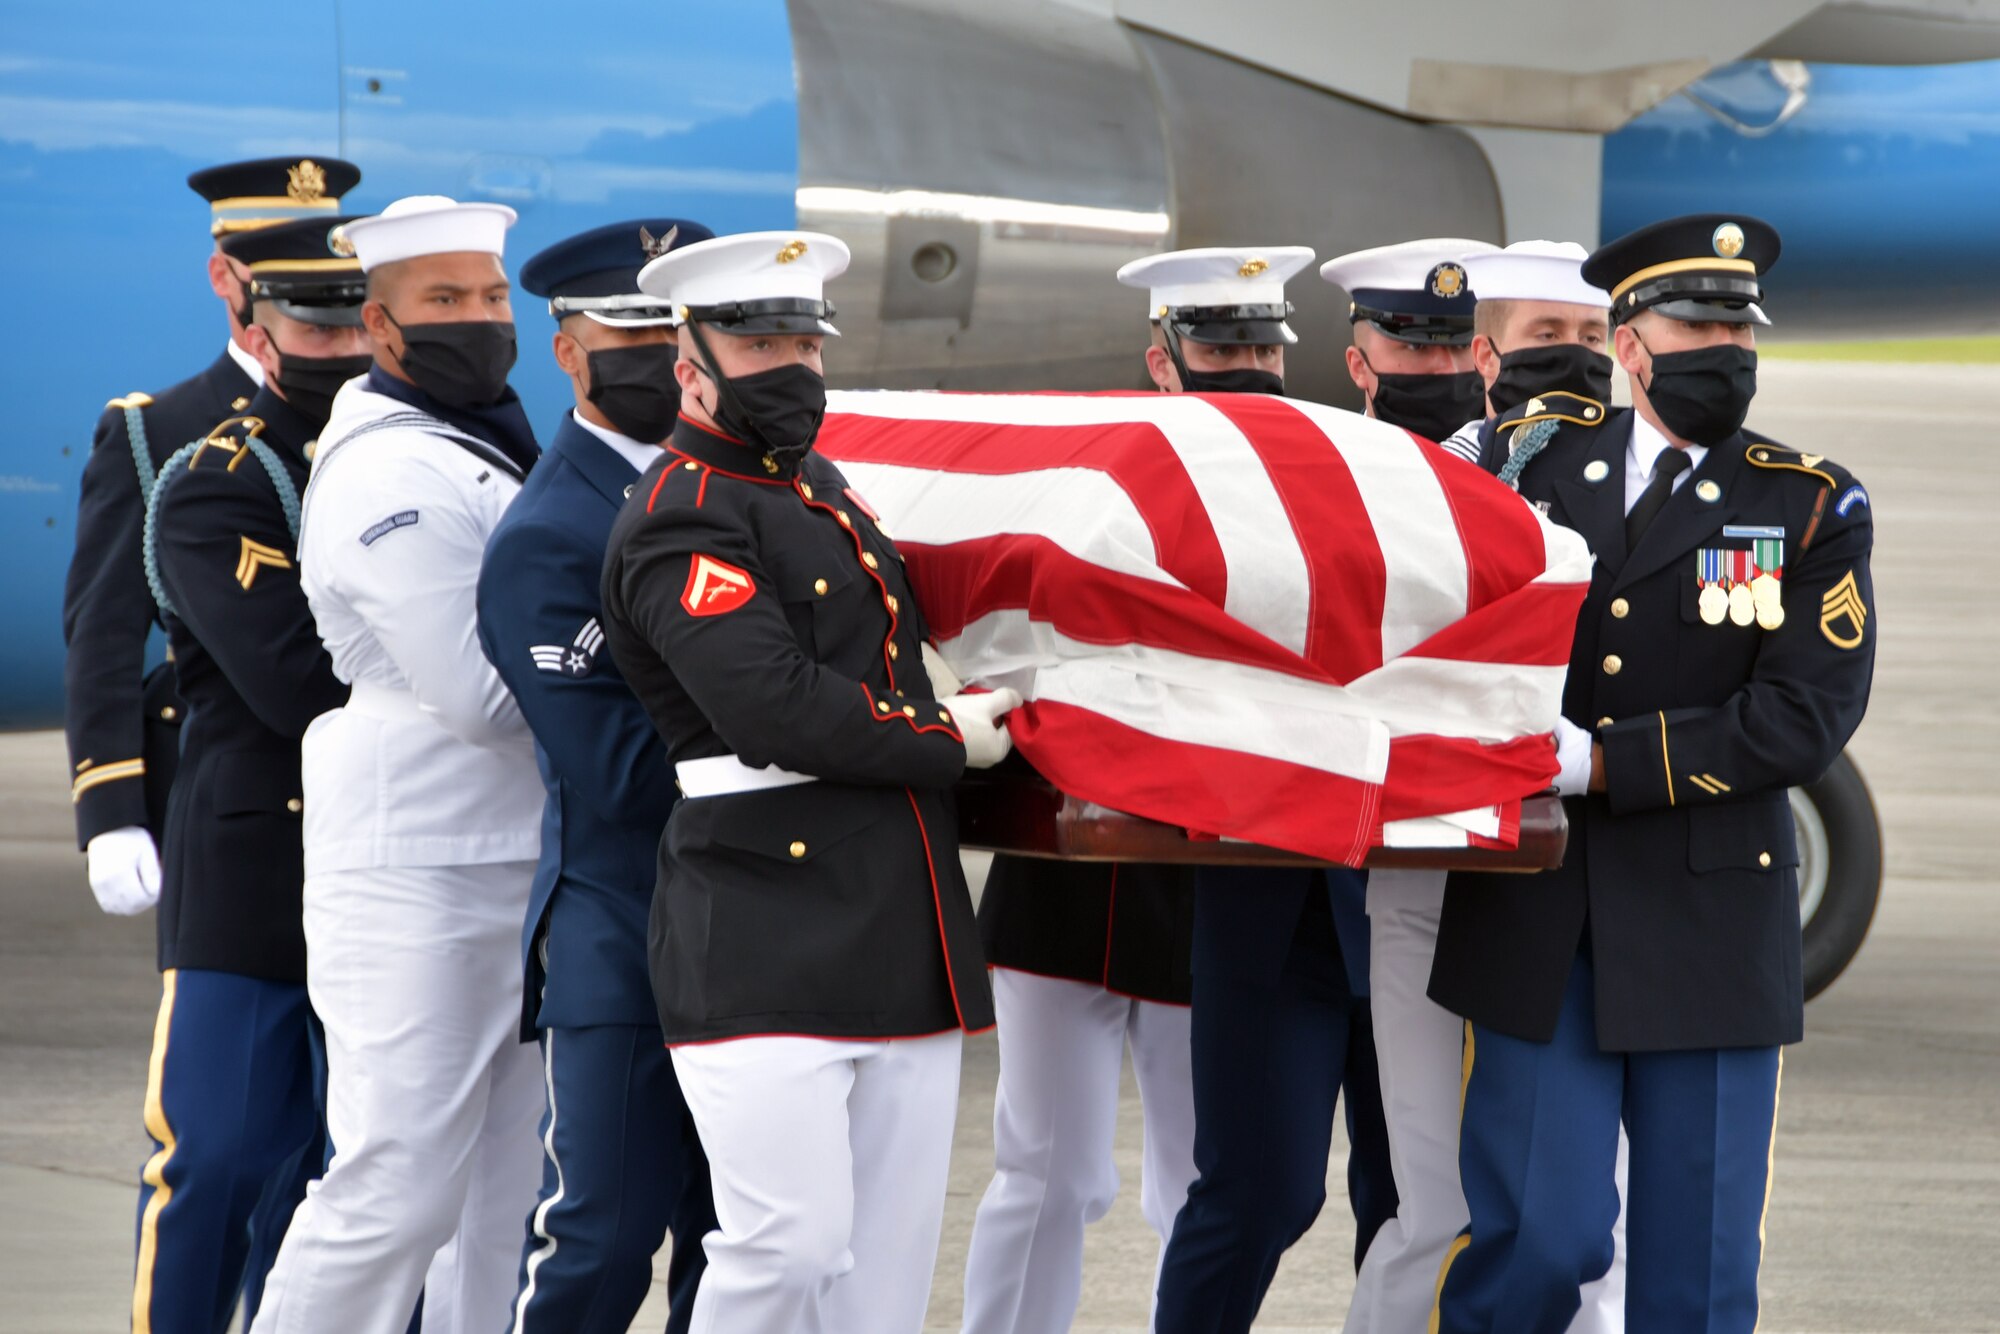 An Armed Forces Body Bearer Team carries the flag-draped casket of Rep. John Lewis at Dobbins Air Reserve Base, Georgia, July 29, 2020. DoD personnel are honoring the congressman by providing military funeral honors during his congressional funeral events. (U.S. Air Force photo by Airman 1st Class Kendra A.  Ransum)